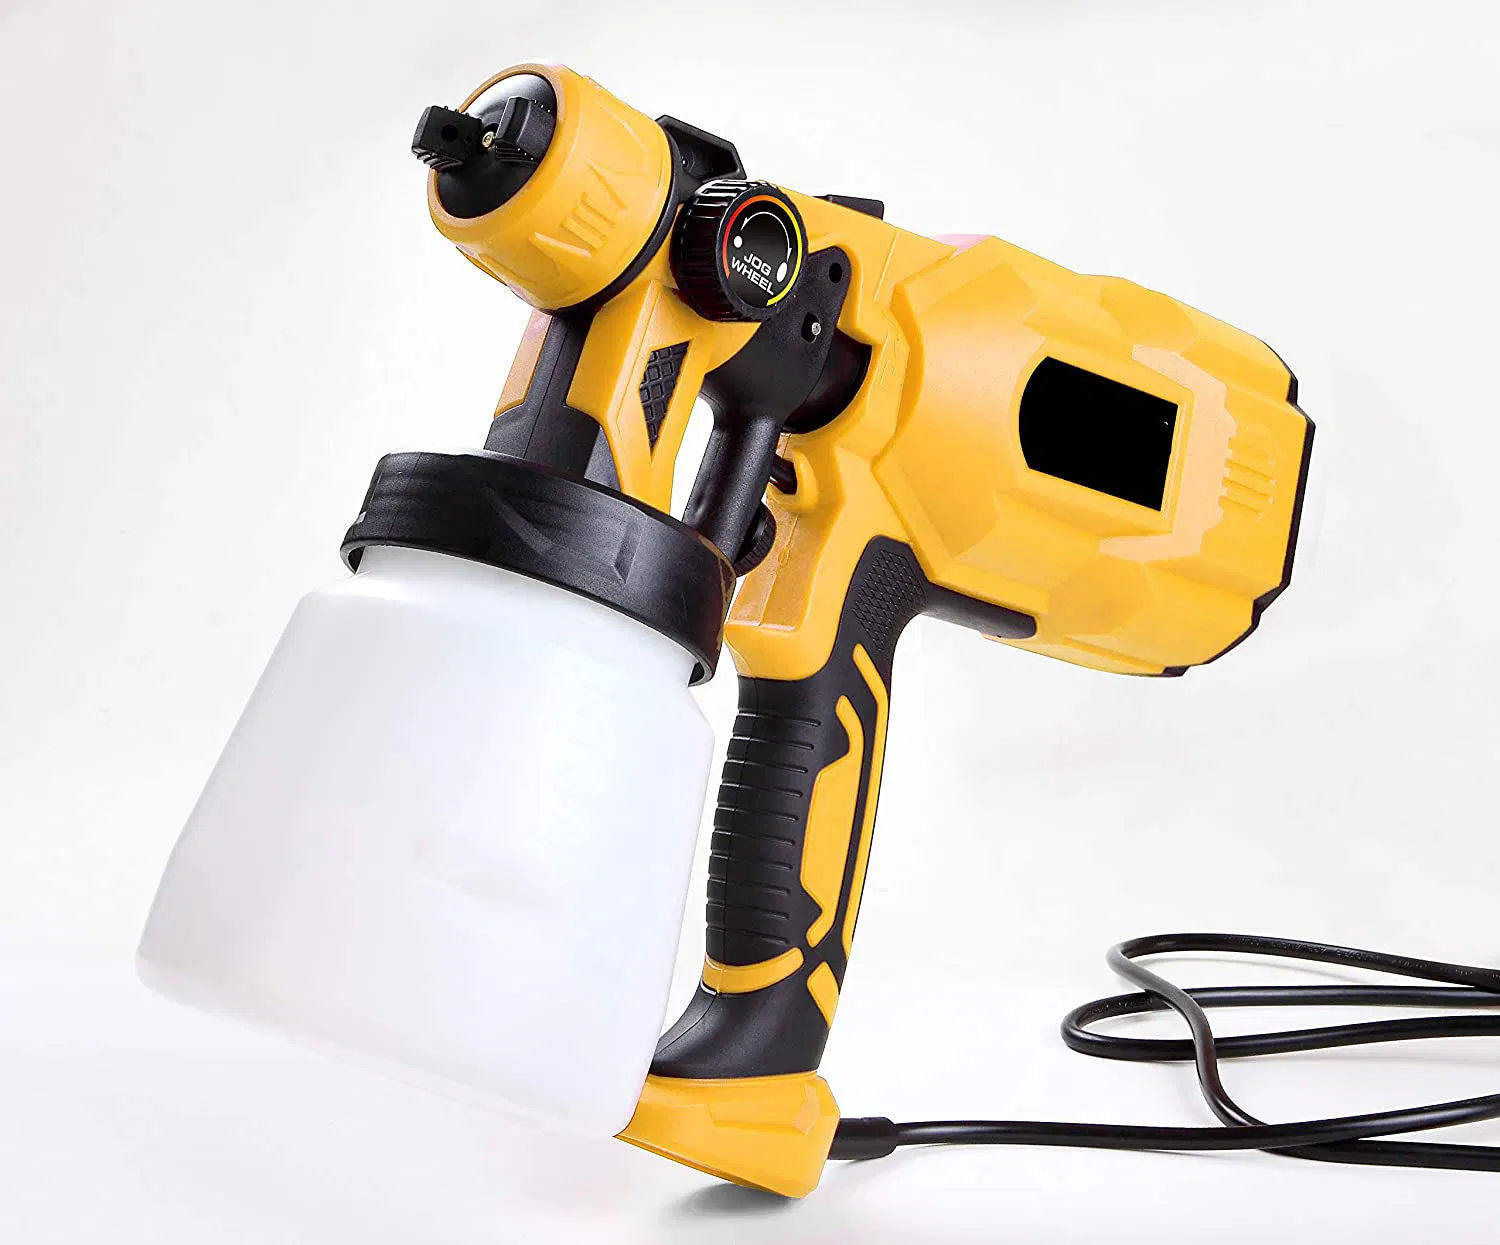 800ml 550V Power Home Wall Disinfection Zoom Painting HVLP Airless Paint Sprayer Portable Electric Spray Gun